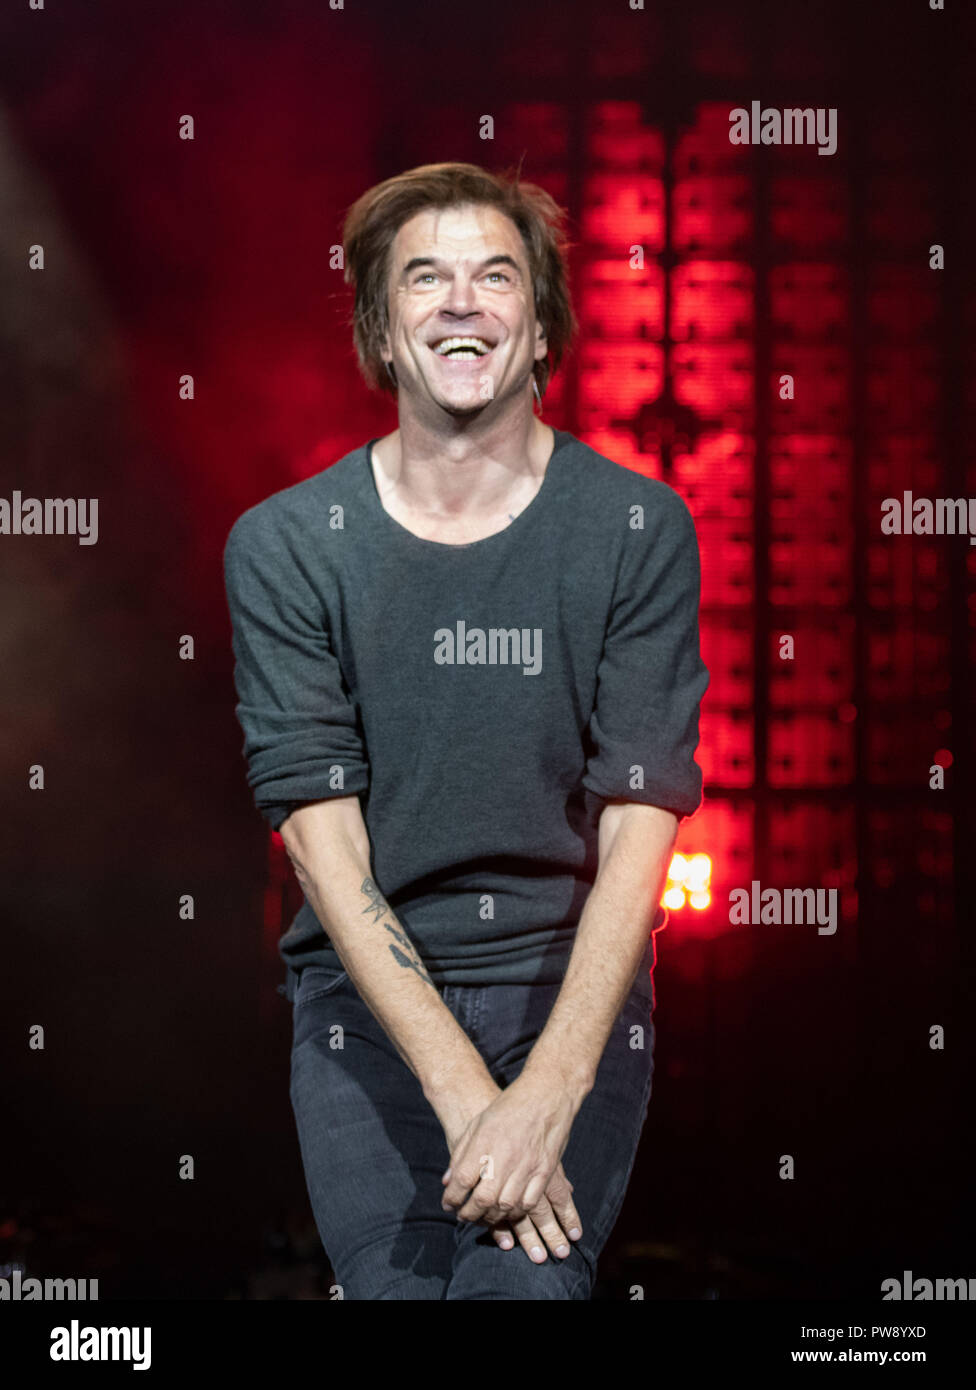 13 October 2018, North Rhine-Westphalia, Duesseldorf: 13 October 2018,  Germany, Duesseldorf: Frontman Campino from the band "Die Toten Hosen" bows  to the audience. About 1.3 million people have seen tour concerts of